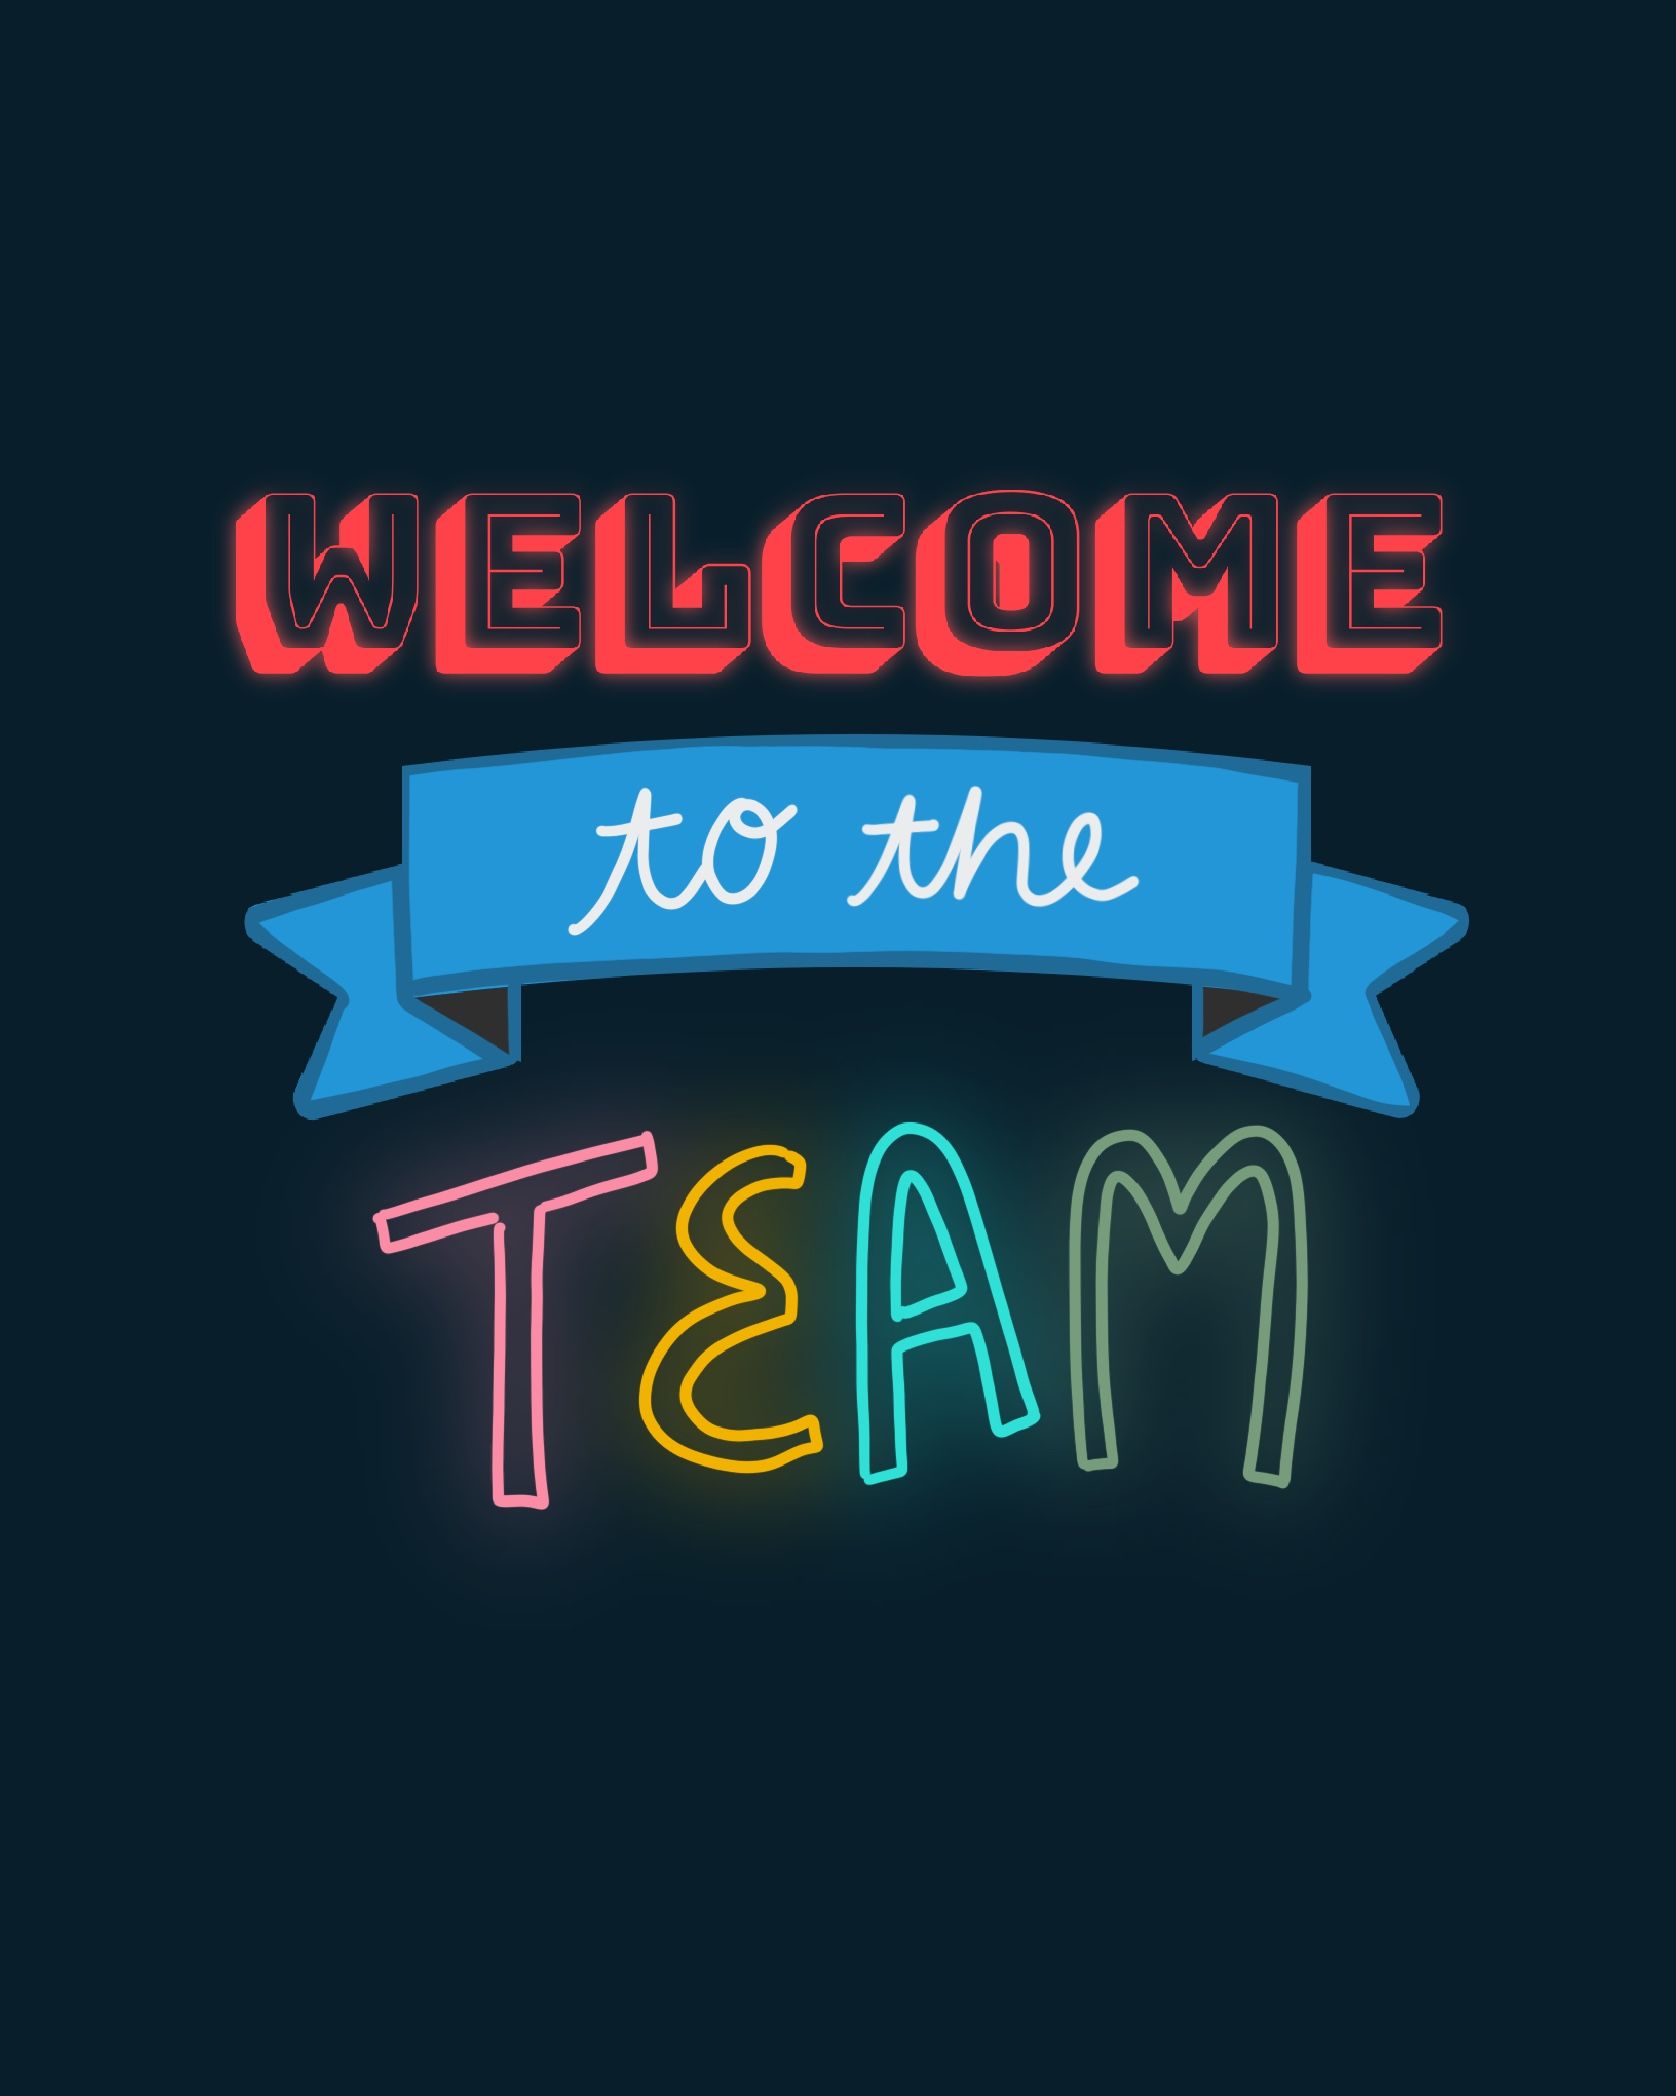 Card design "welcome to the team"